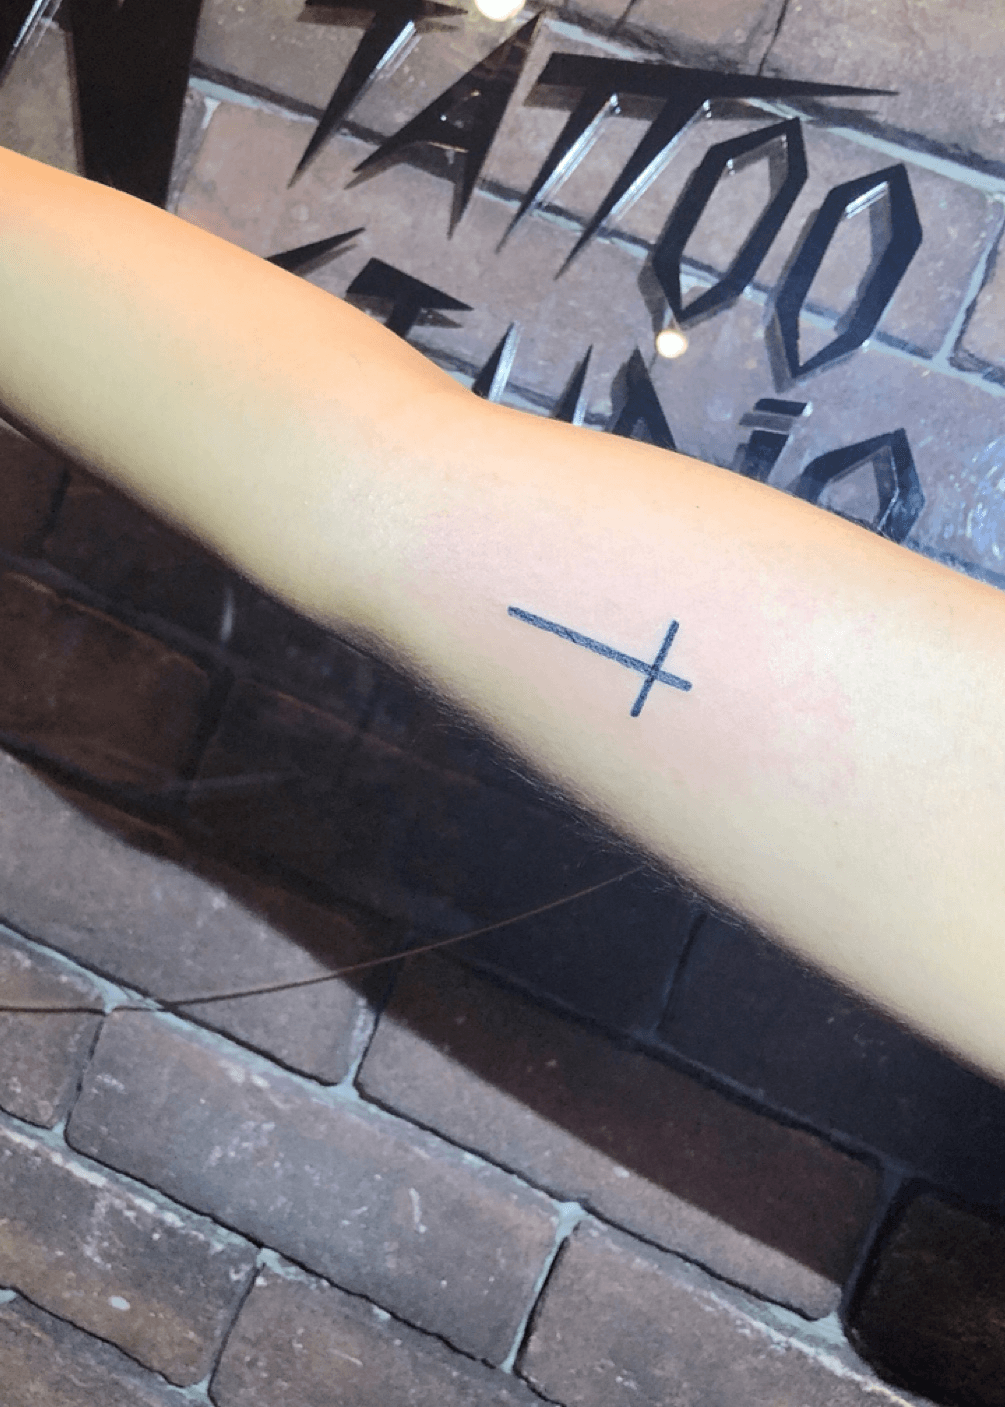 Gurkha Tattoo Family Est 1942  Fine Line Tattoo  Small crucifix tattoo   For appointments with Philip kindly email him at  httpsgurkhatattoofamilycomcontact Gurkha Tattoo Family Est 1942 Tattoos  and Piercings Singapore 